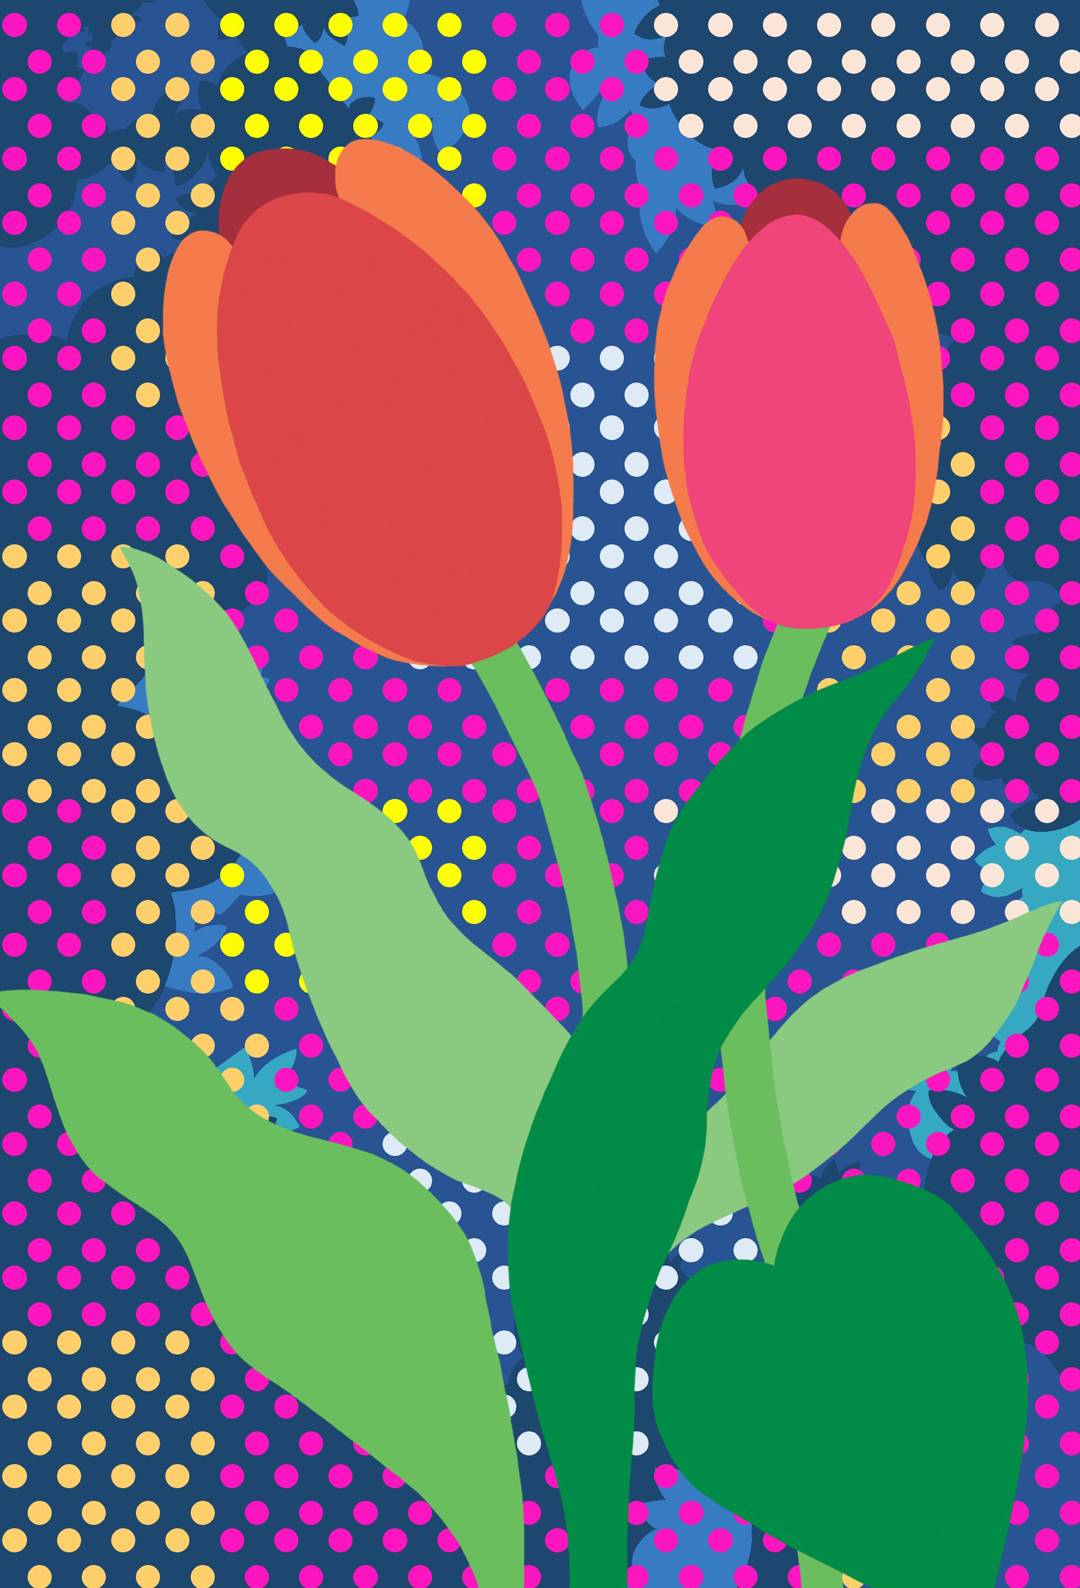 Red Dutch Tulip with patterned background 